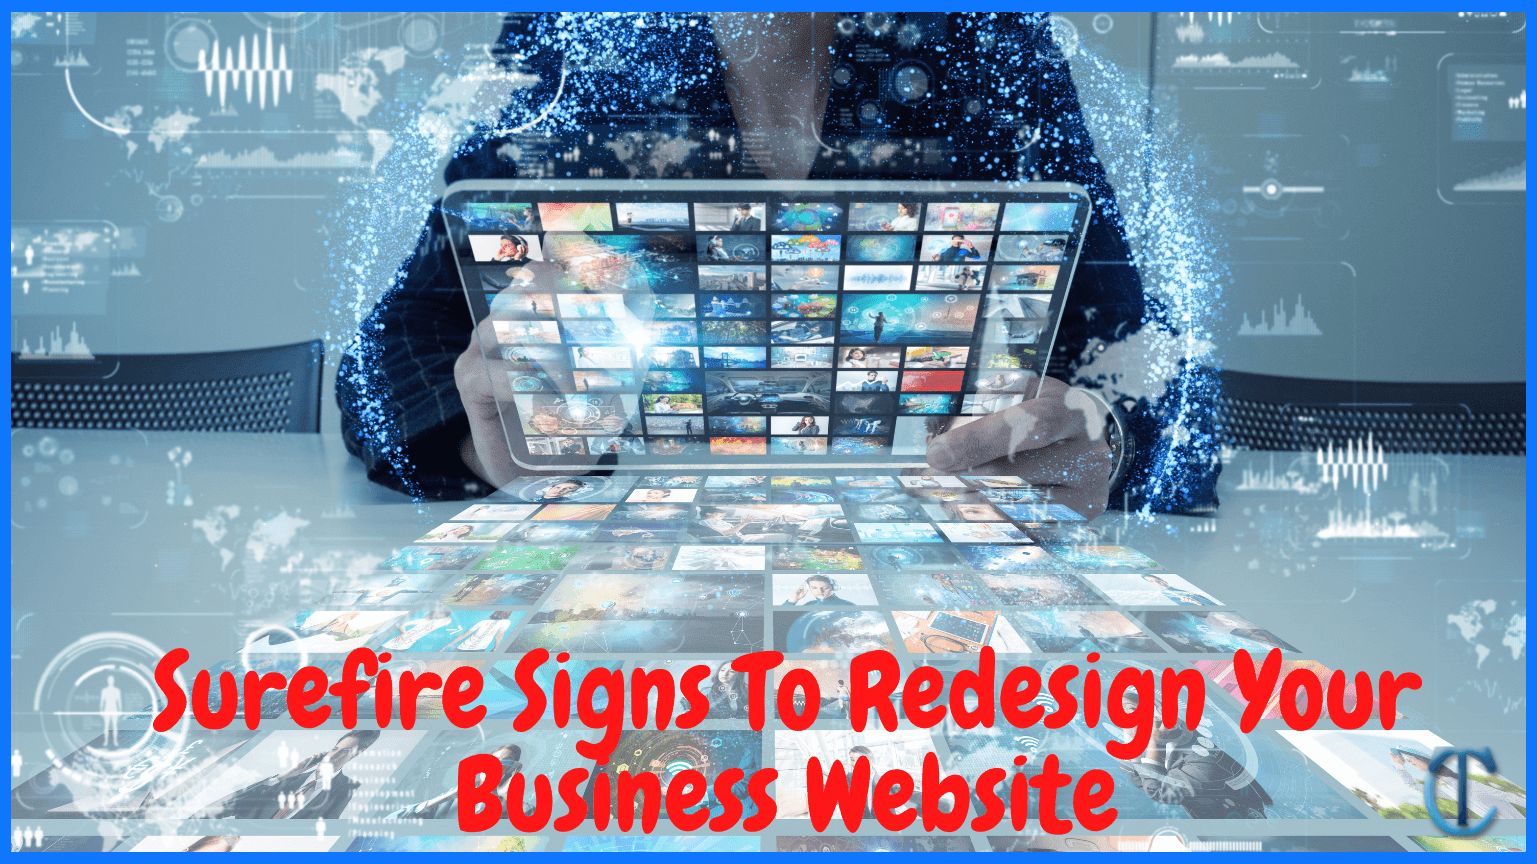 Surefire Signs To Redesign Your Business Website